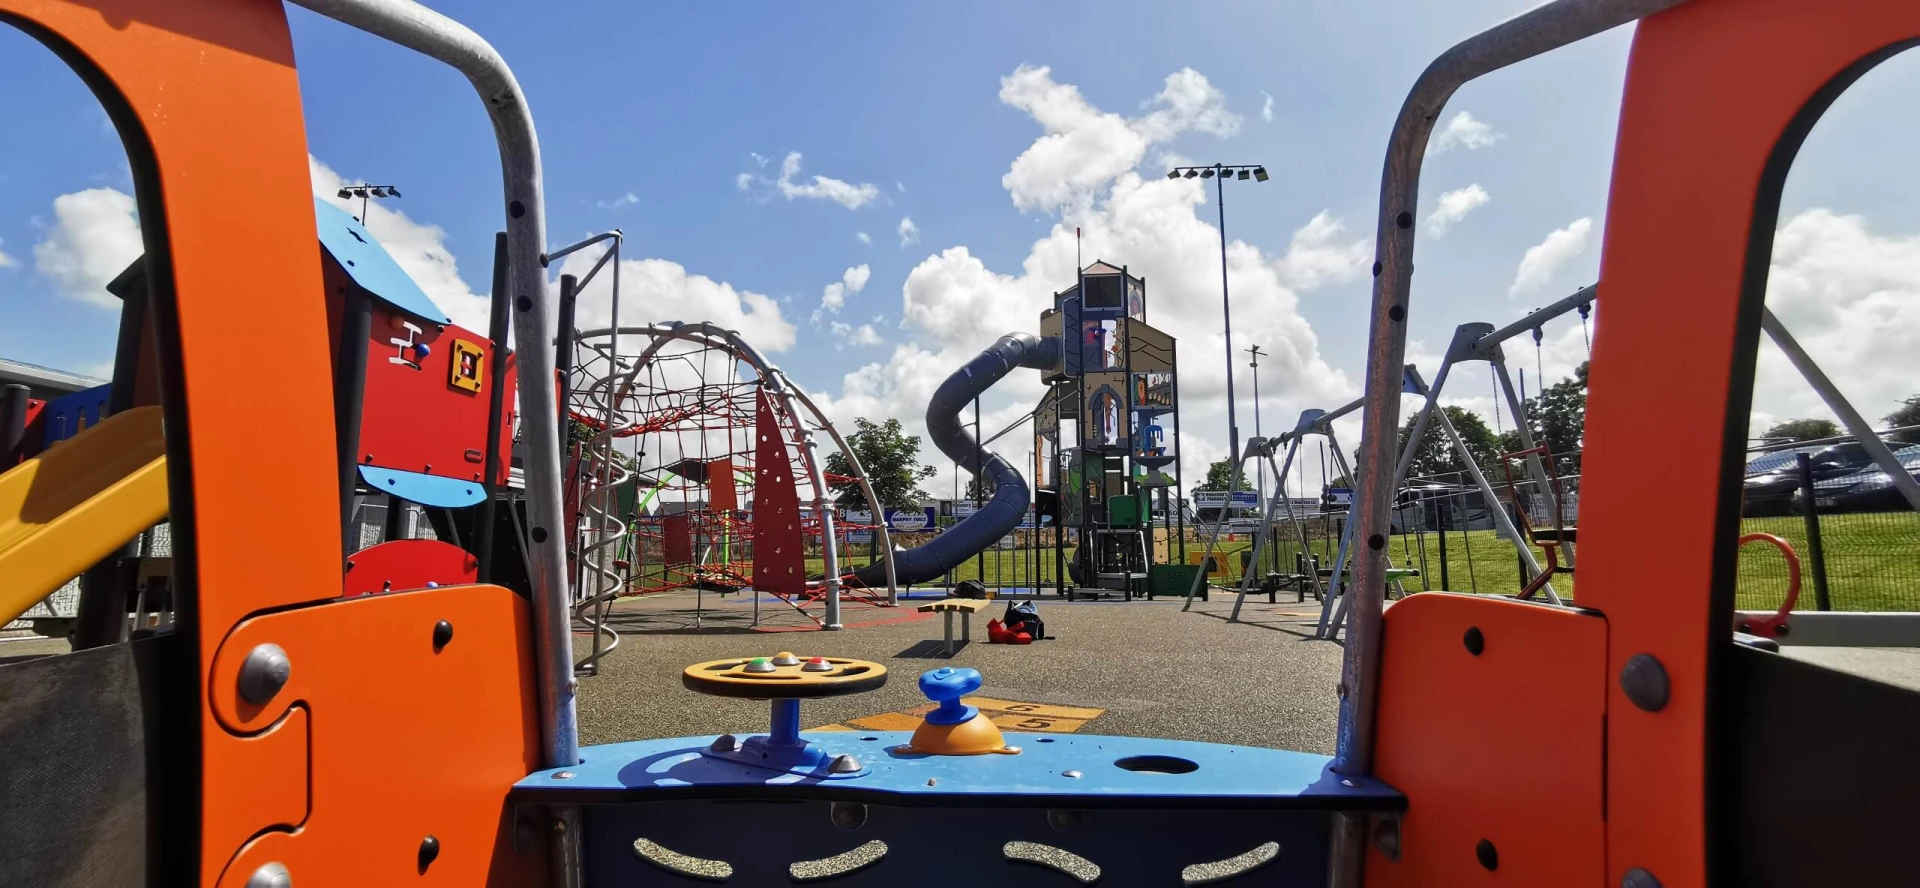 A view of a playground with a slide and swings.